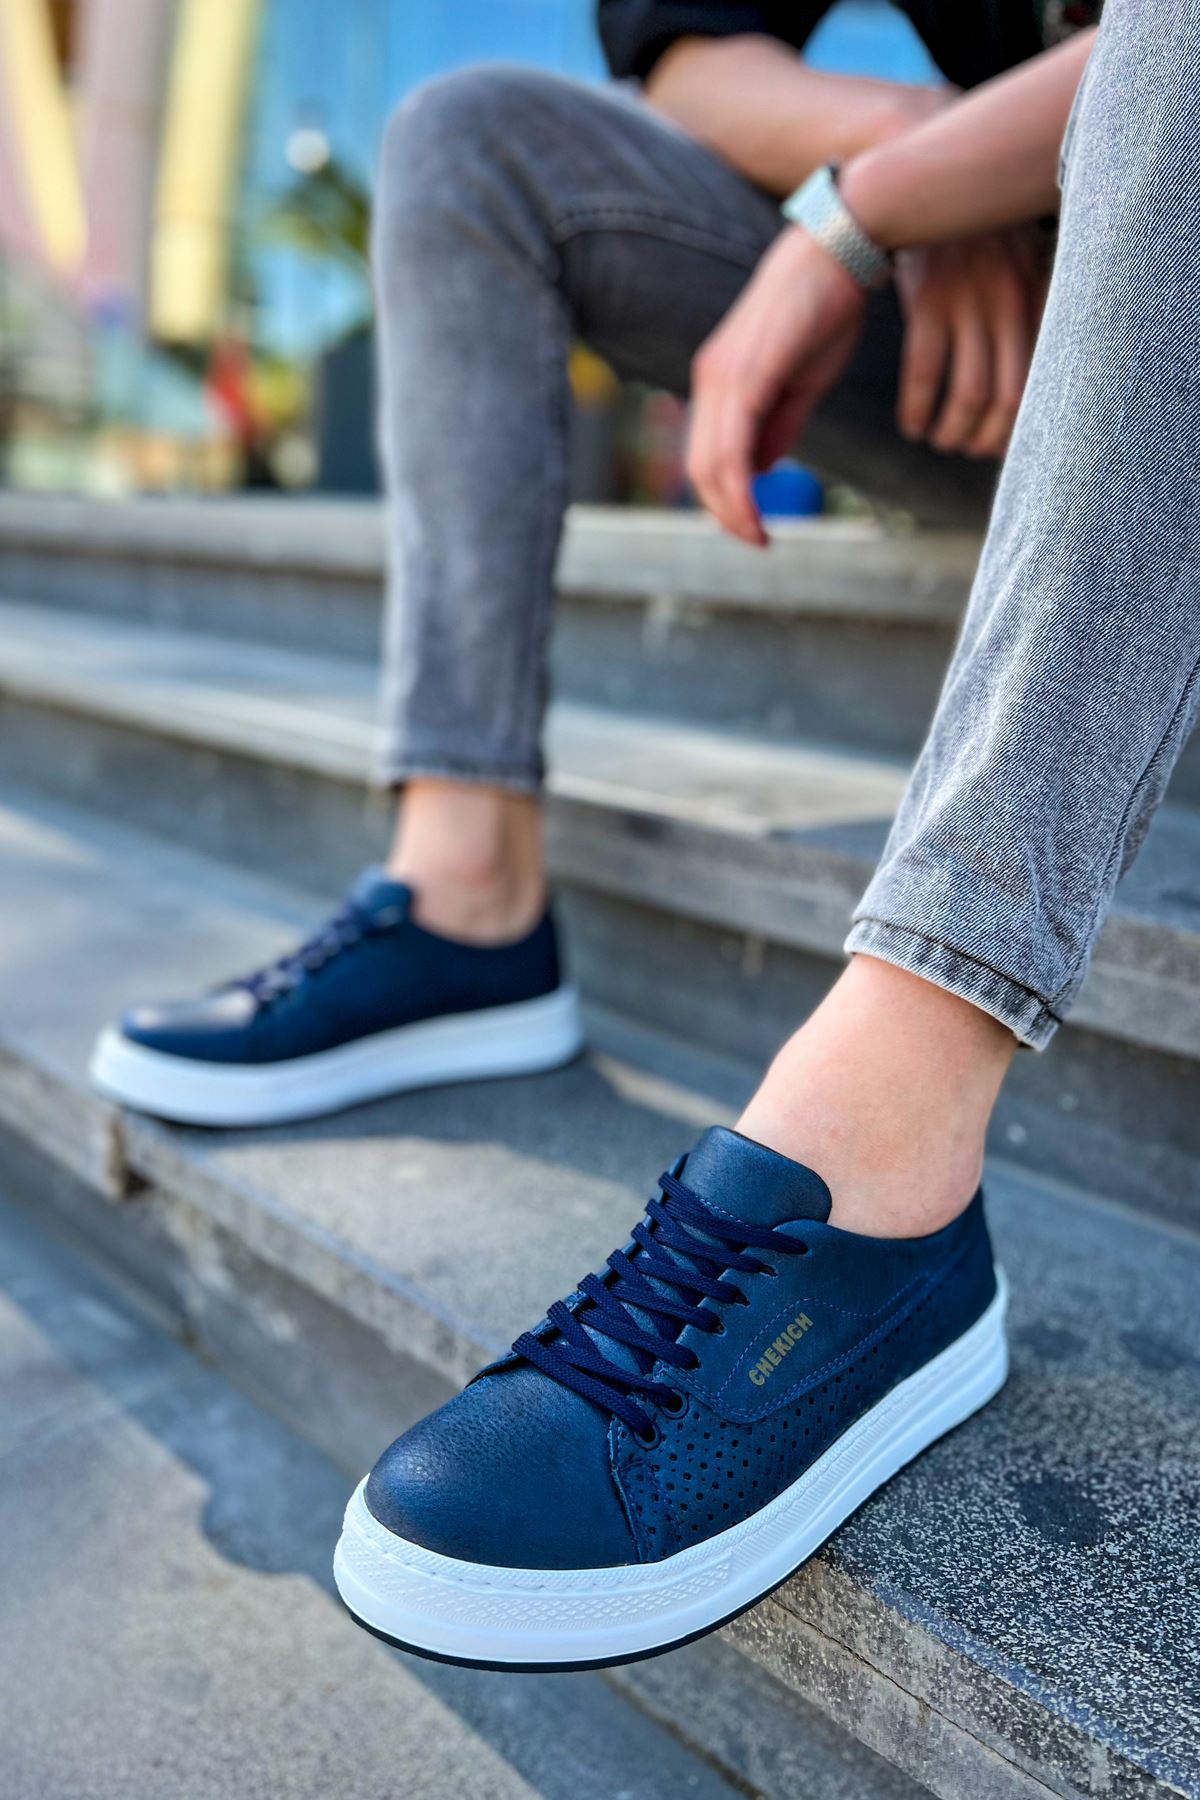 CH043 Men's Unisex Navy Blue-White Sole Casual Shoes - STREETMODE ™